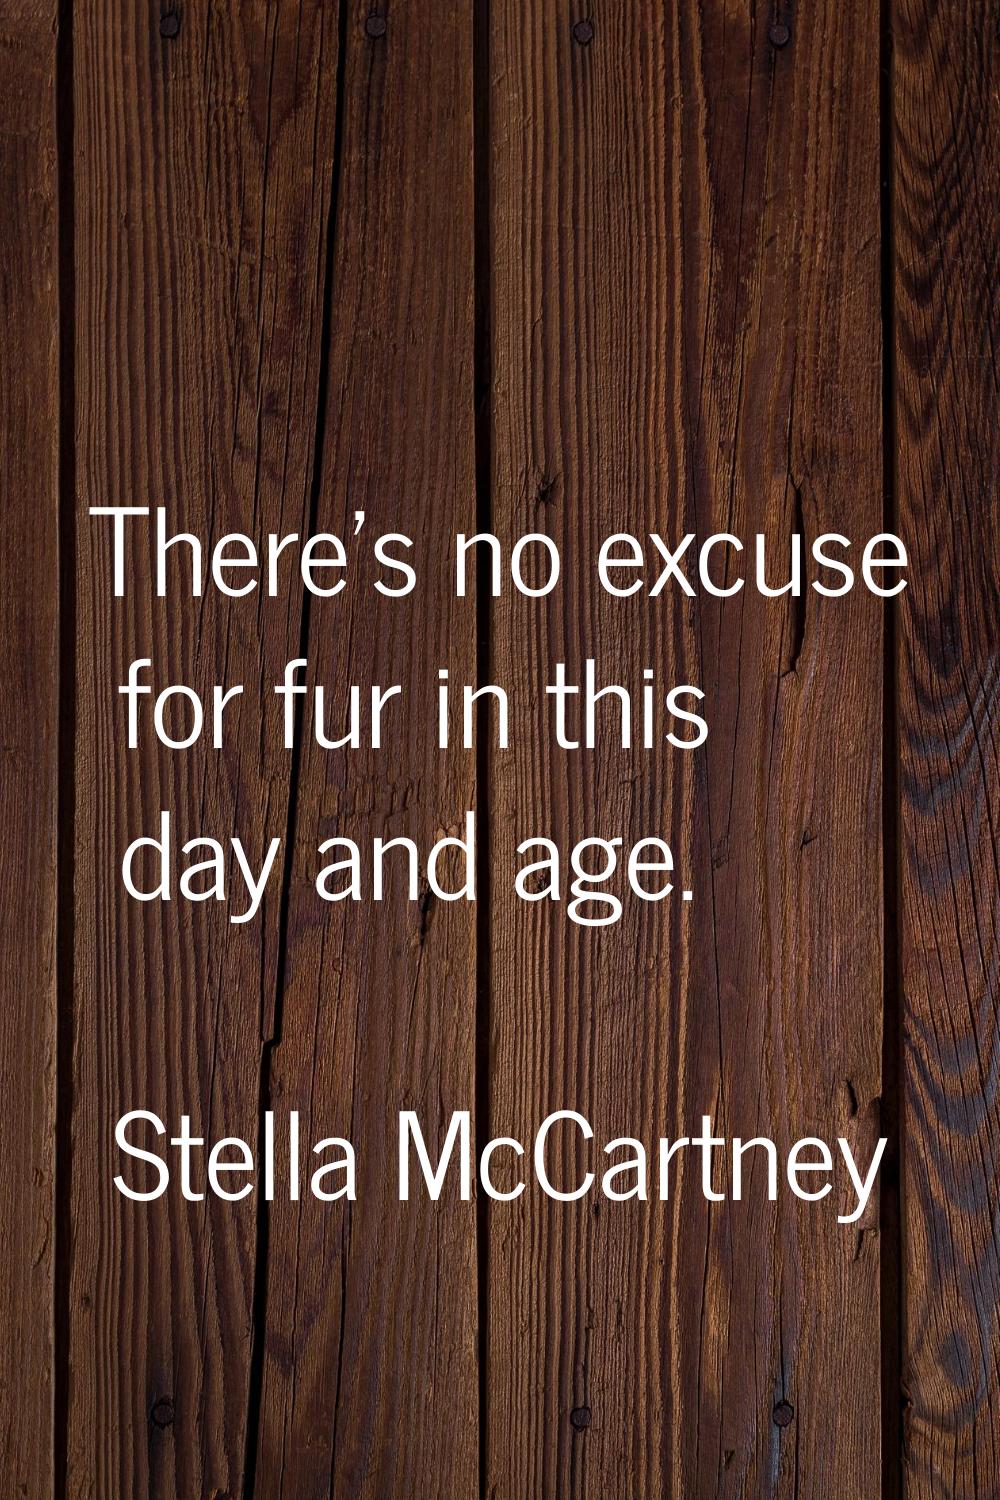 There's no excuse for fur in this day and age.